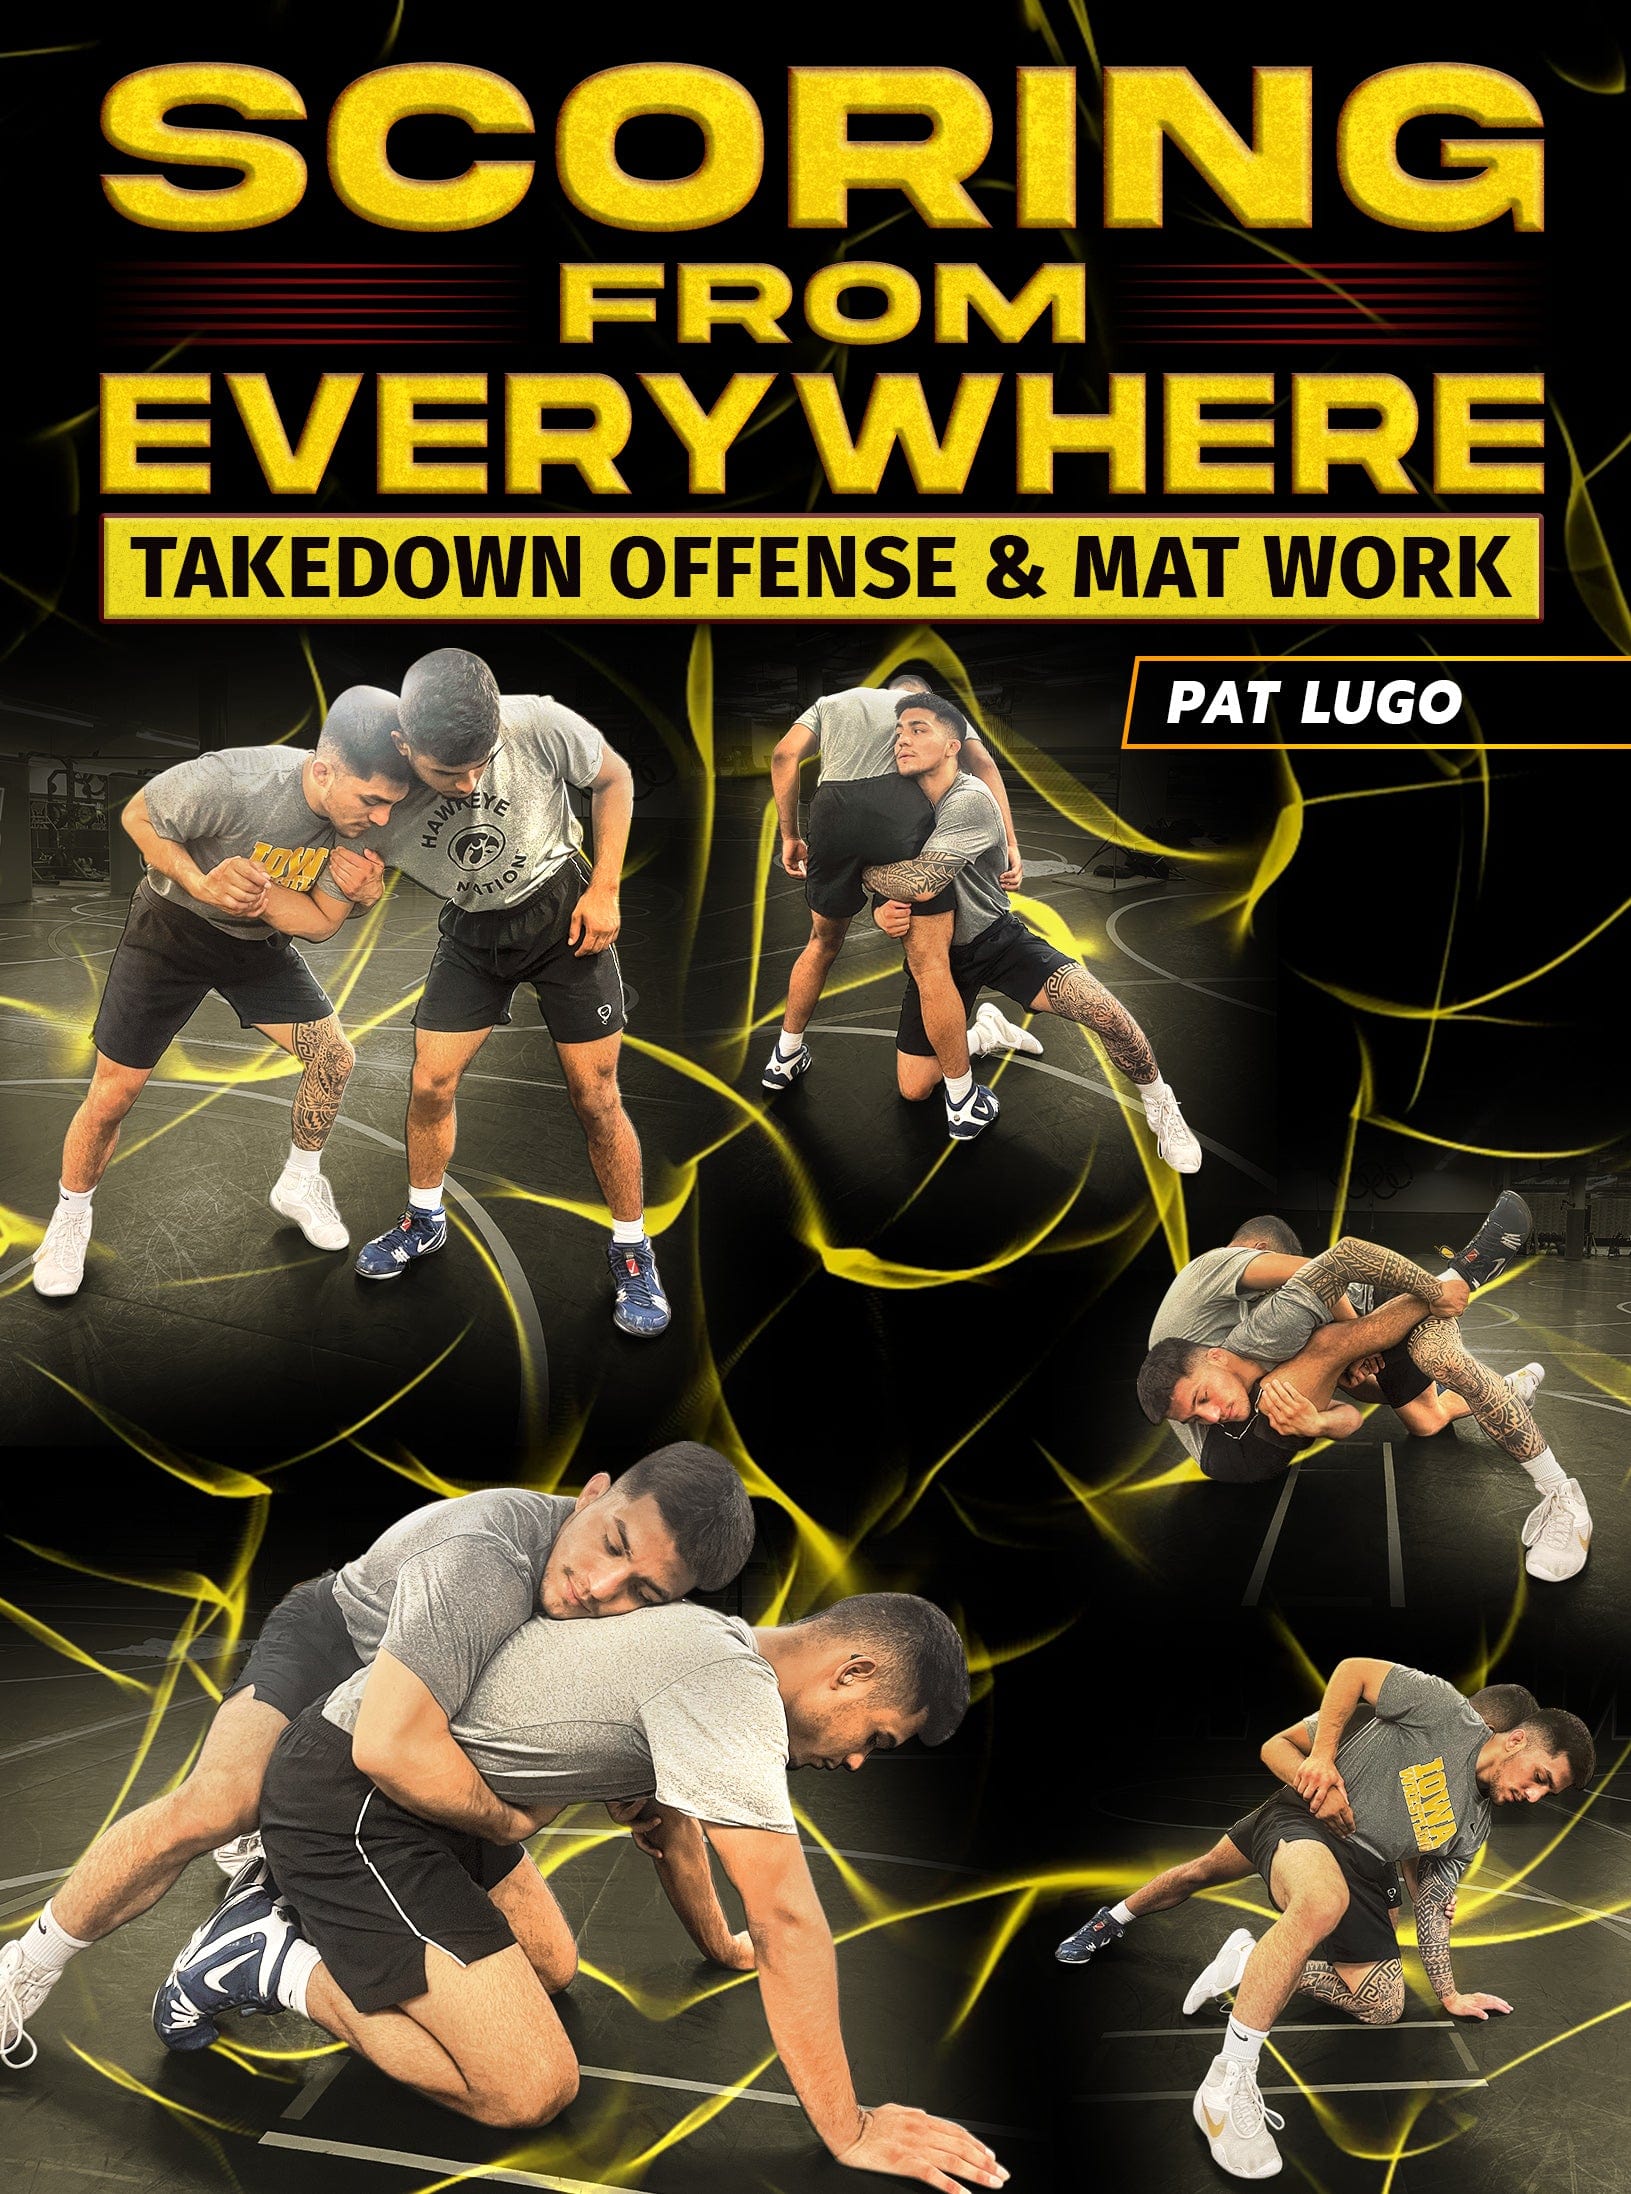 Scoring From Everywhere by Pat Lugo - Fanatic Wrestling